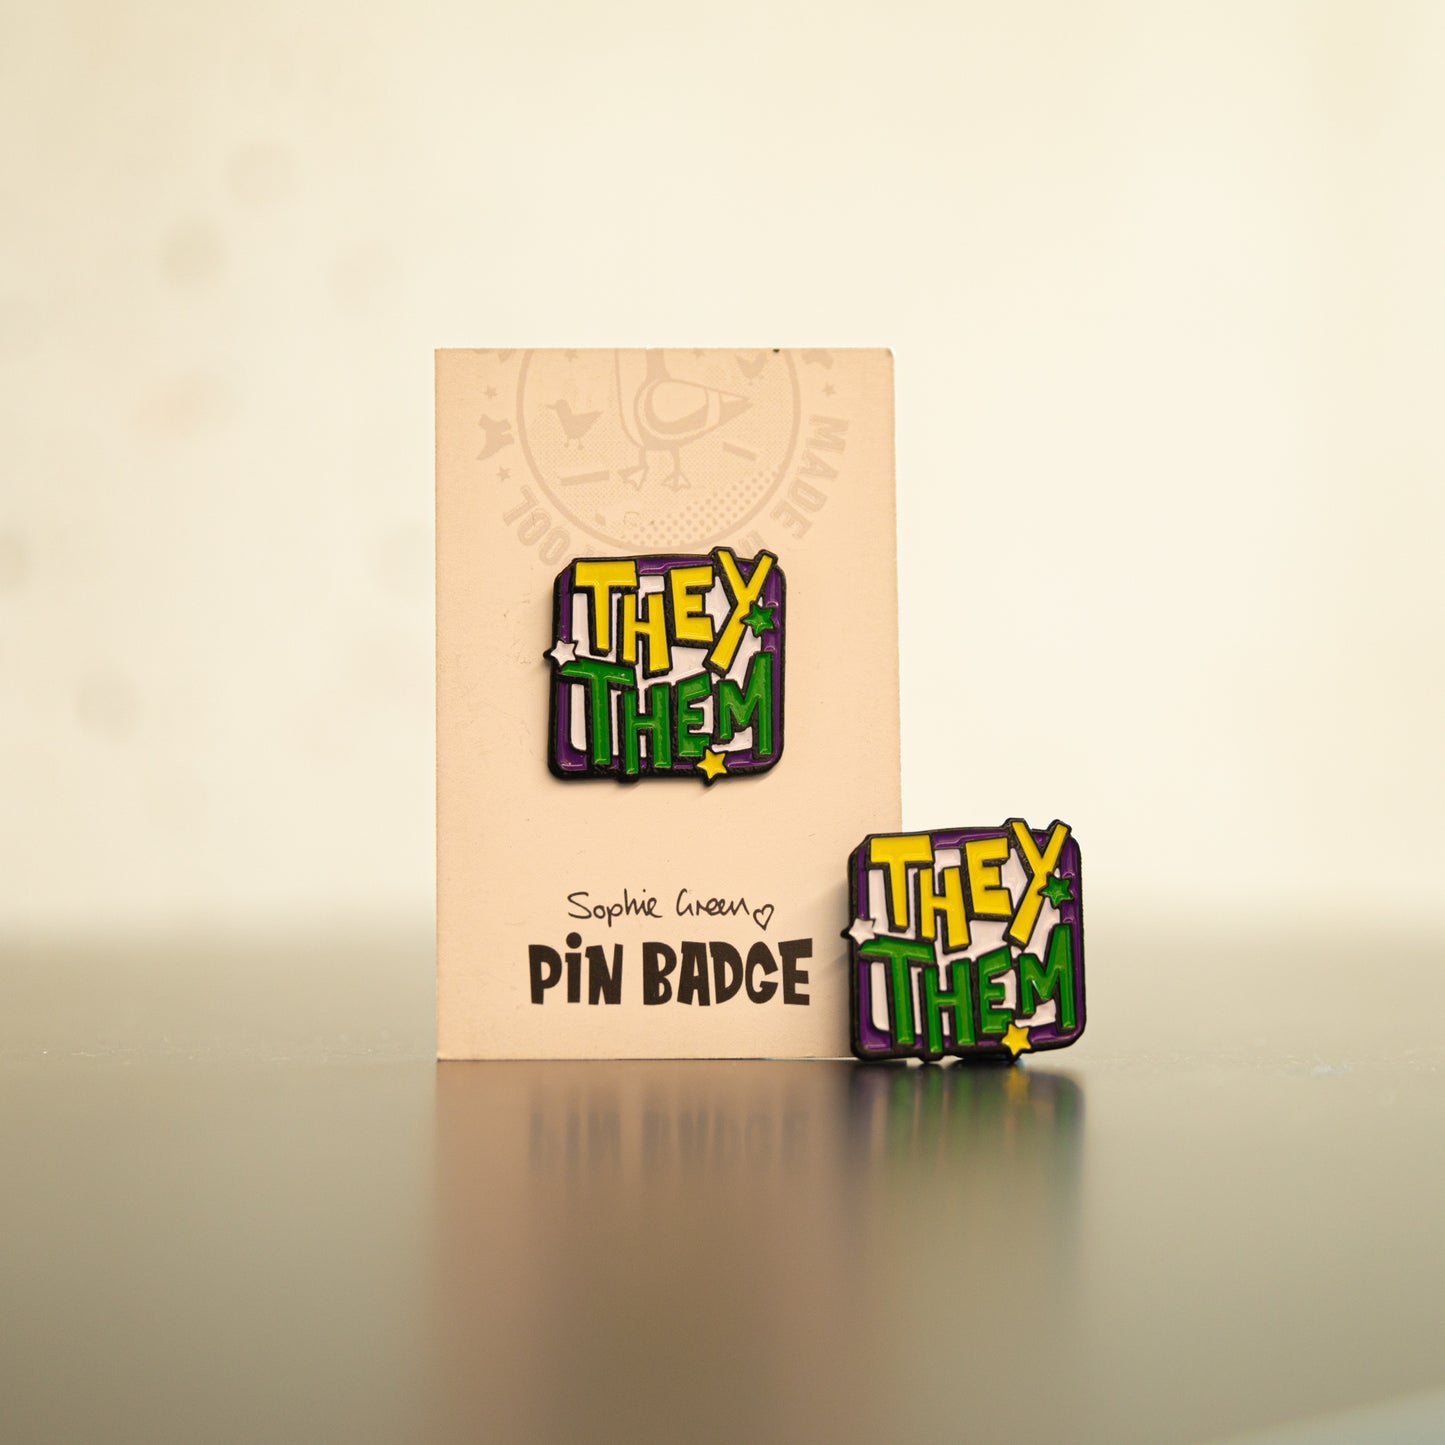 They/Them Pronoun Pin Badge by Sophie Green